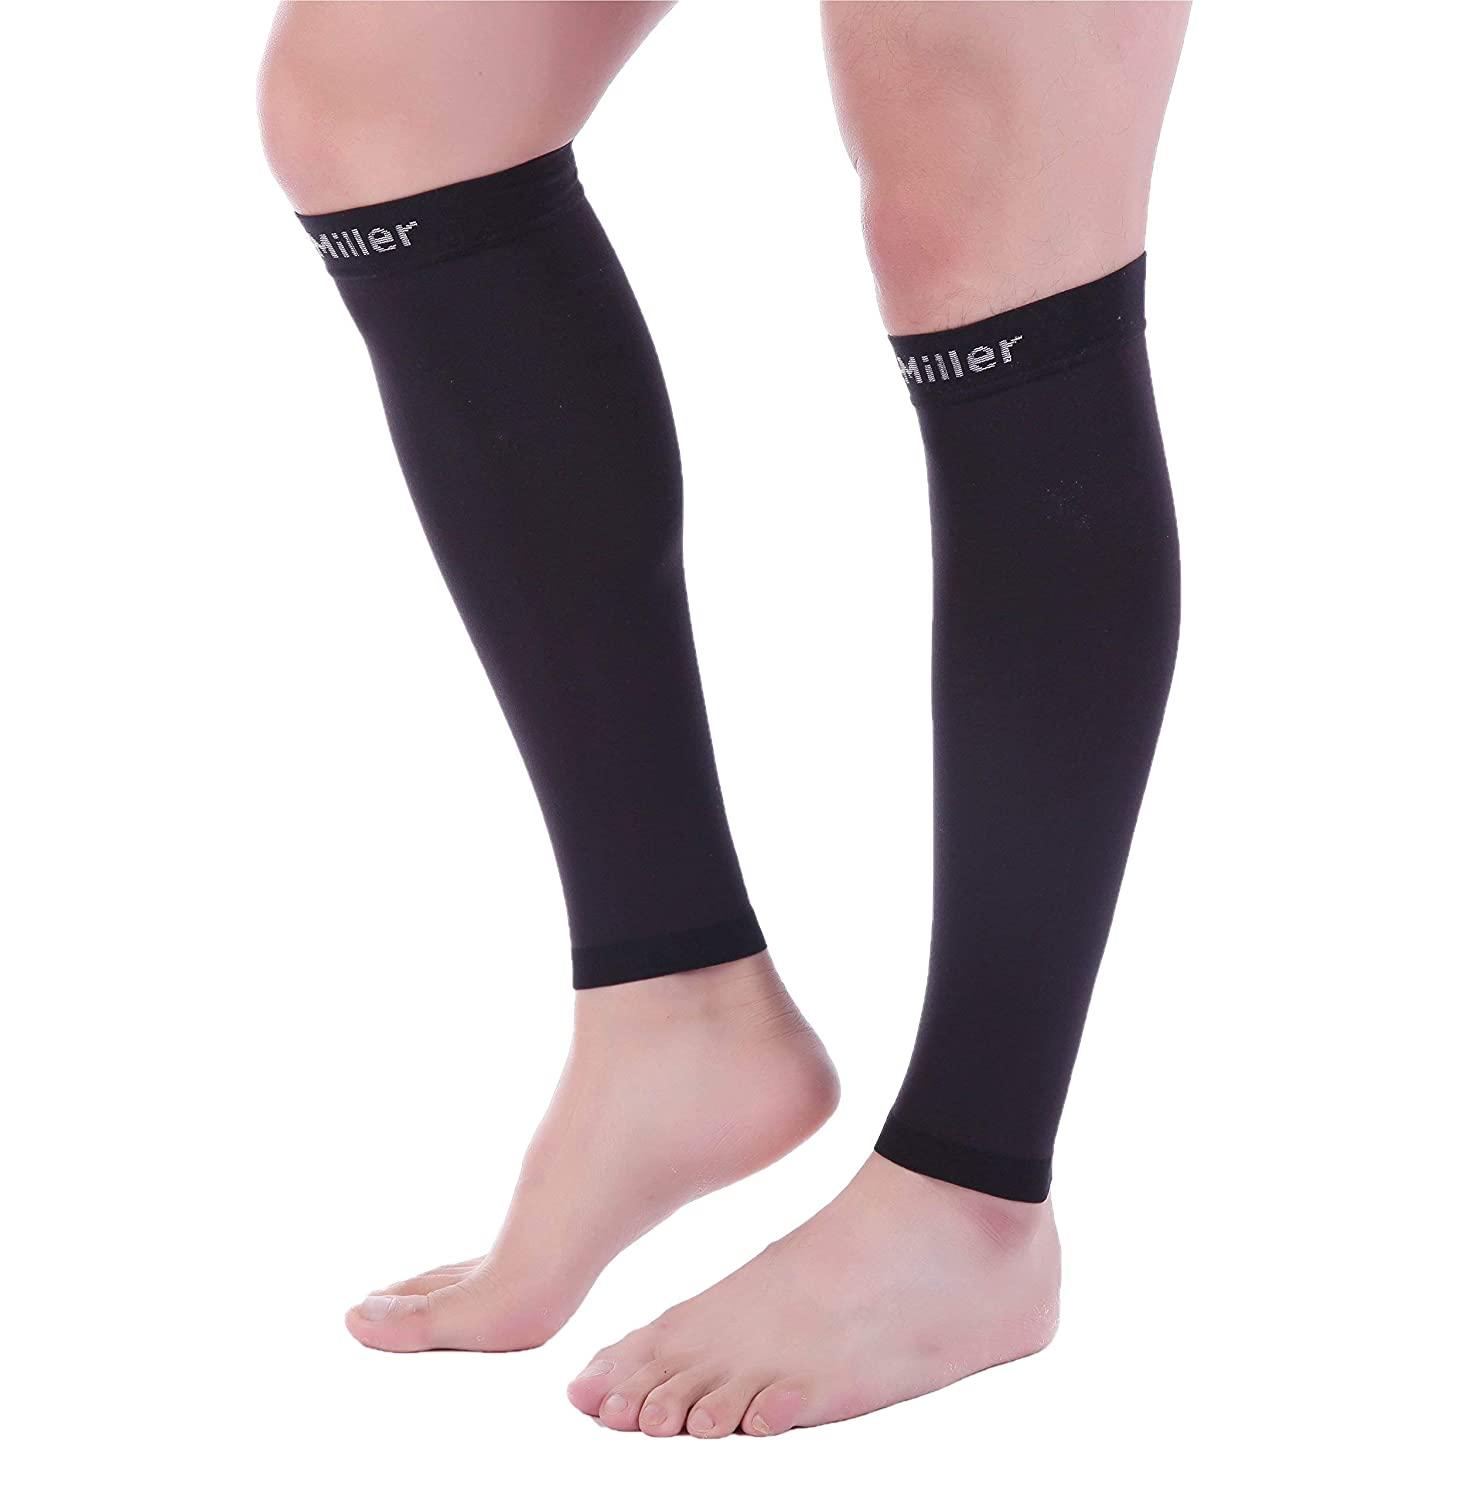 Doc Miller Calf Compression Sleeve Men - 30-40 mmHg, Medical Grade Calf  Sleeves for Men and Women Supports Shin Splints, and Varicose Veins Recovery  - 1 Pair Large Size - Black Calf Sleeve Jet Black Large